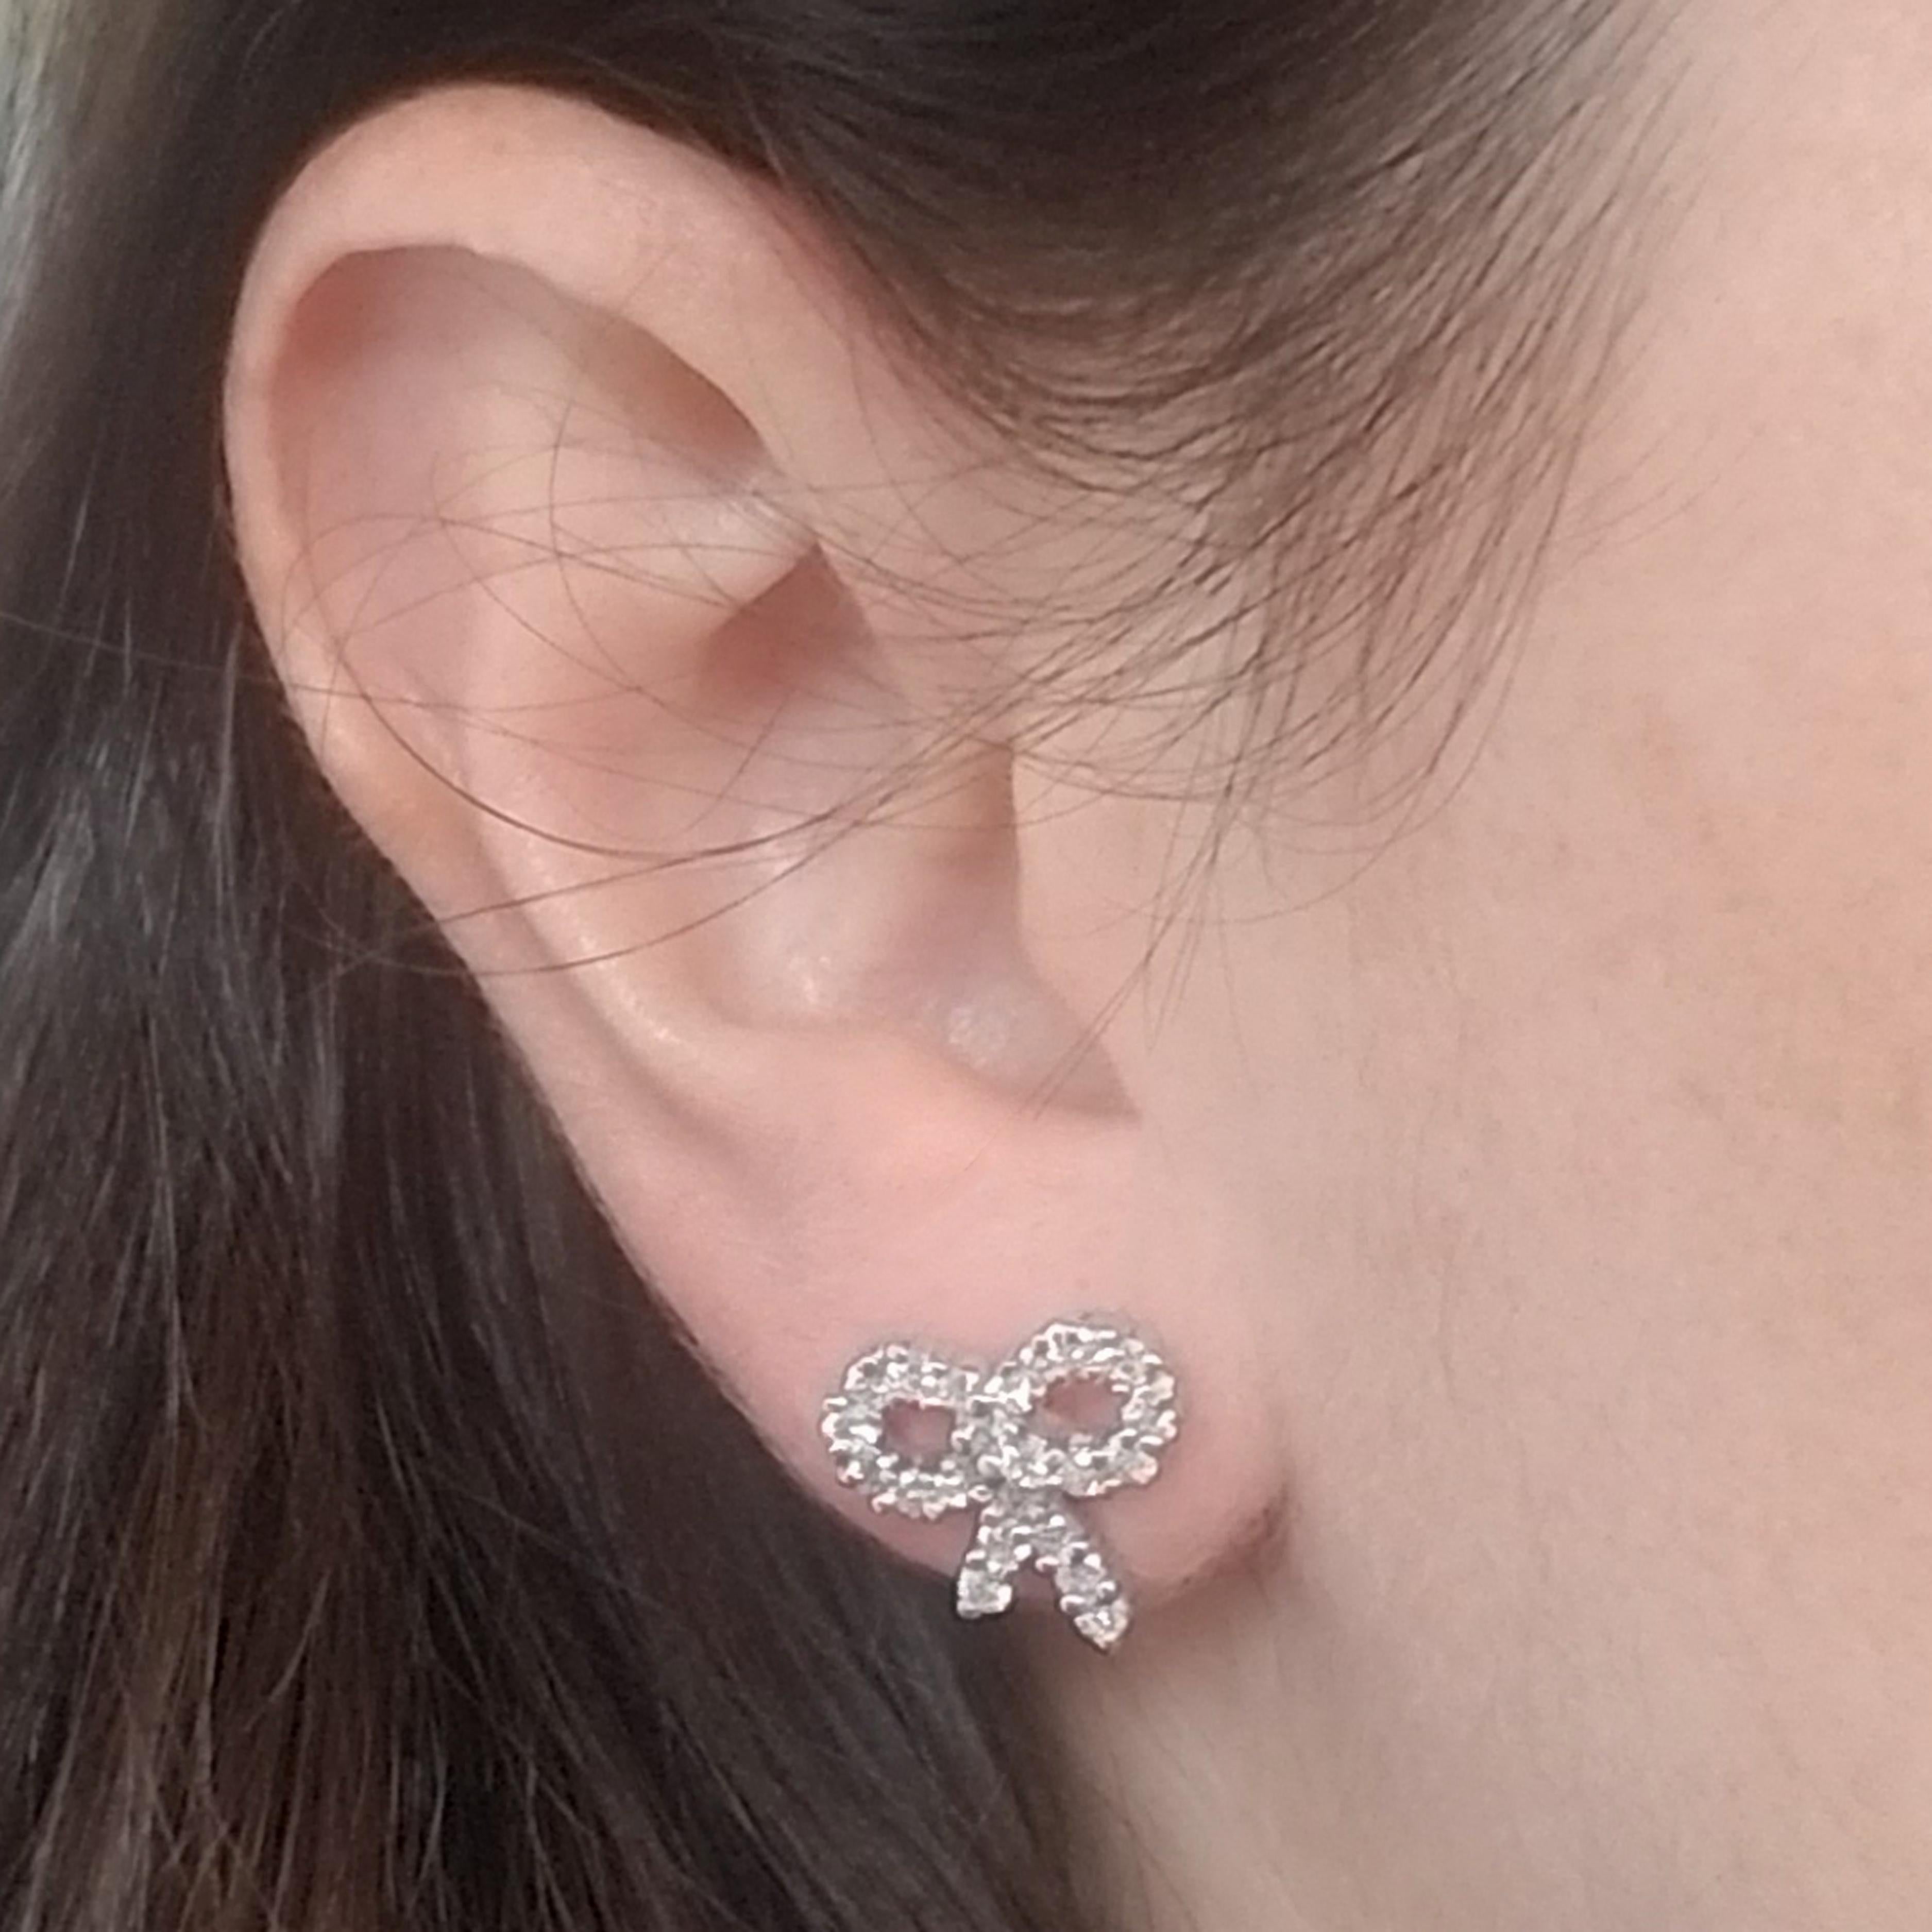 18 Karat White Gold Bow Earrings Featuring 46 Round Brilliant Cut Diamonds That Total Exactly 1.20 Carats of VS Clarity & G Color. Friction Posts With Friction Backs.